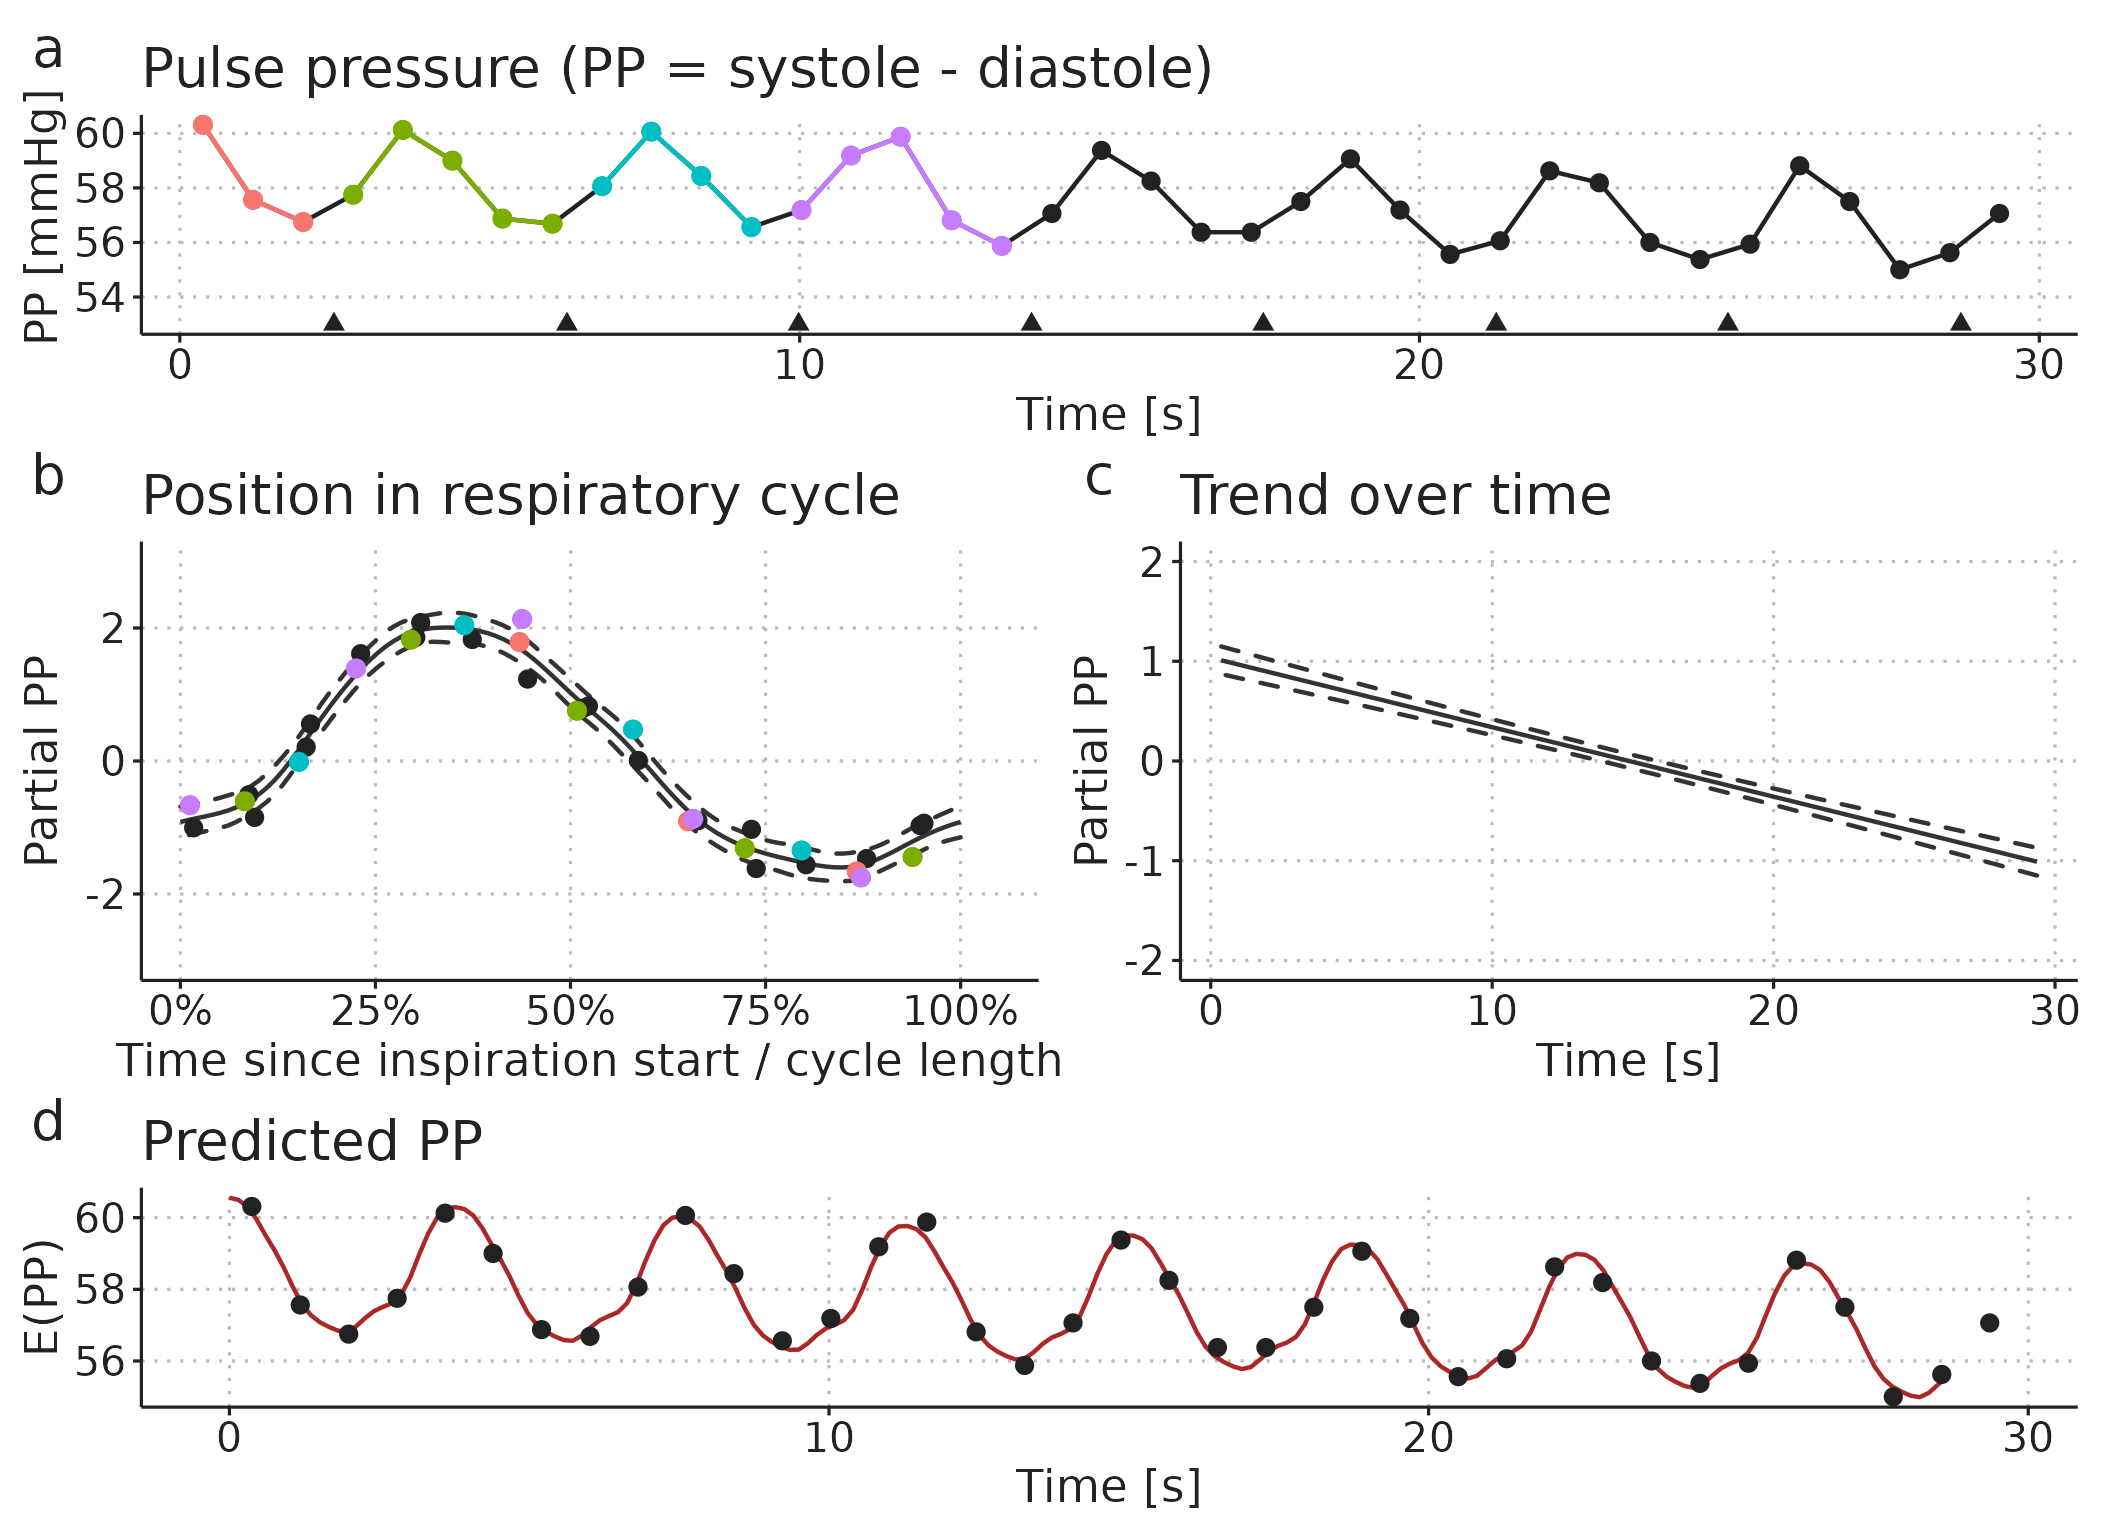 Illustration of how a pulse pressure (PP) time series (a) can be modelled as a smooth repeating effect of ventilation (b) and a slow trend over time (c). Panel d shows the models prediction (fit): the sum of the mean PP, the effect of ventilation (b) and the trend over time (c).